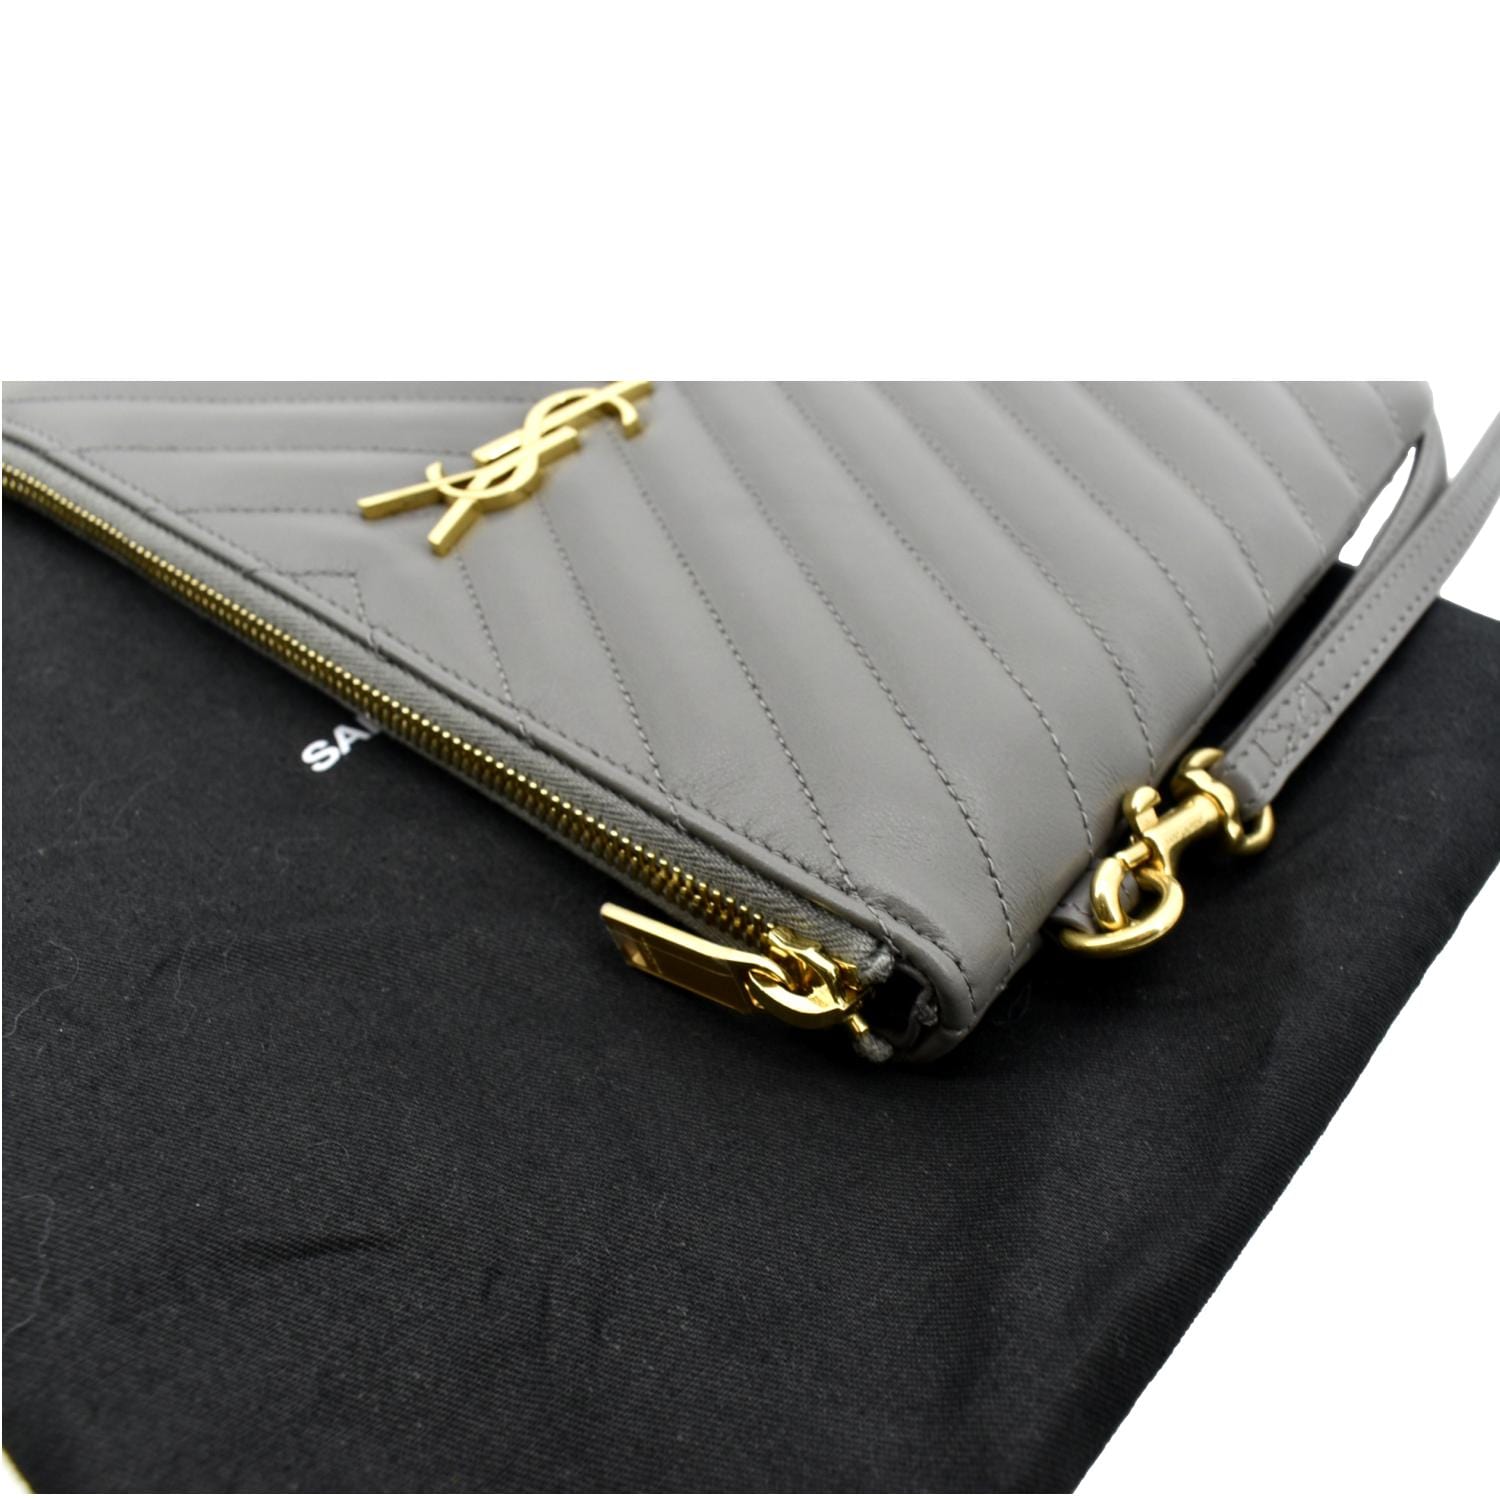 YSL MONOGRAM QUILTED LEATHER POUCH